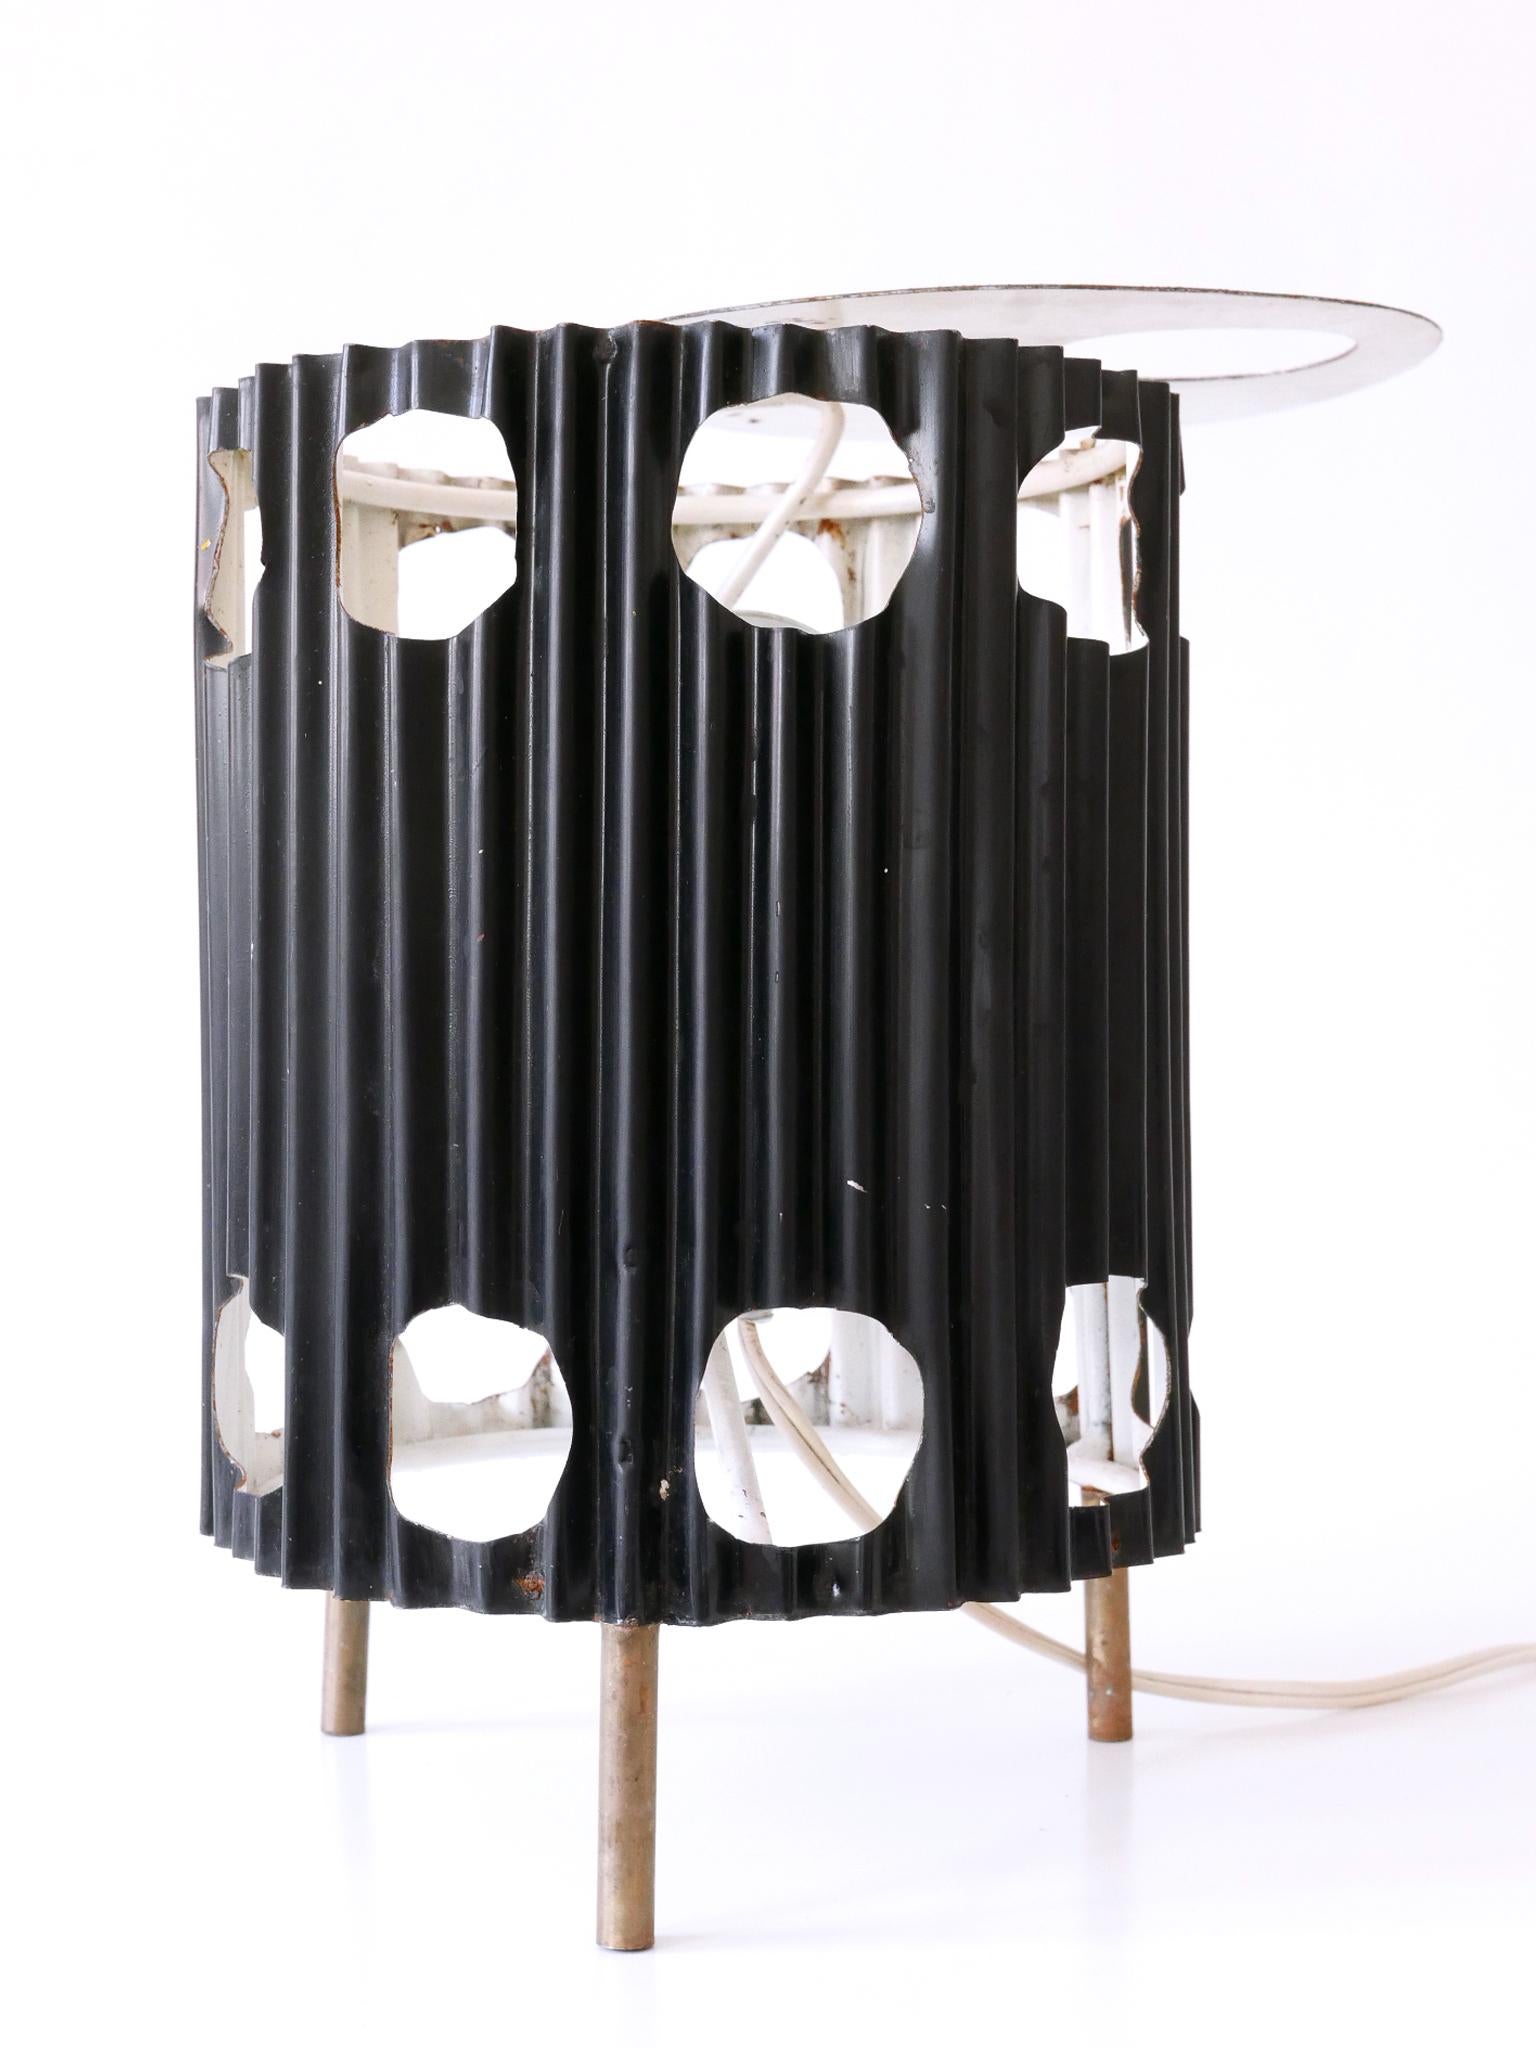 Extremely Rare Mid-Century Modern Table Lamp 'Java' by Mathieu Matégot 1950s For Sale 10